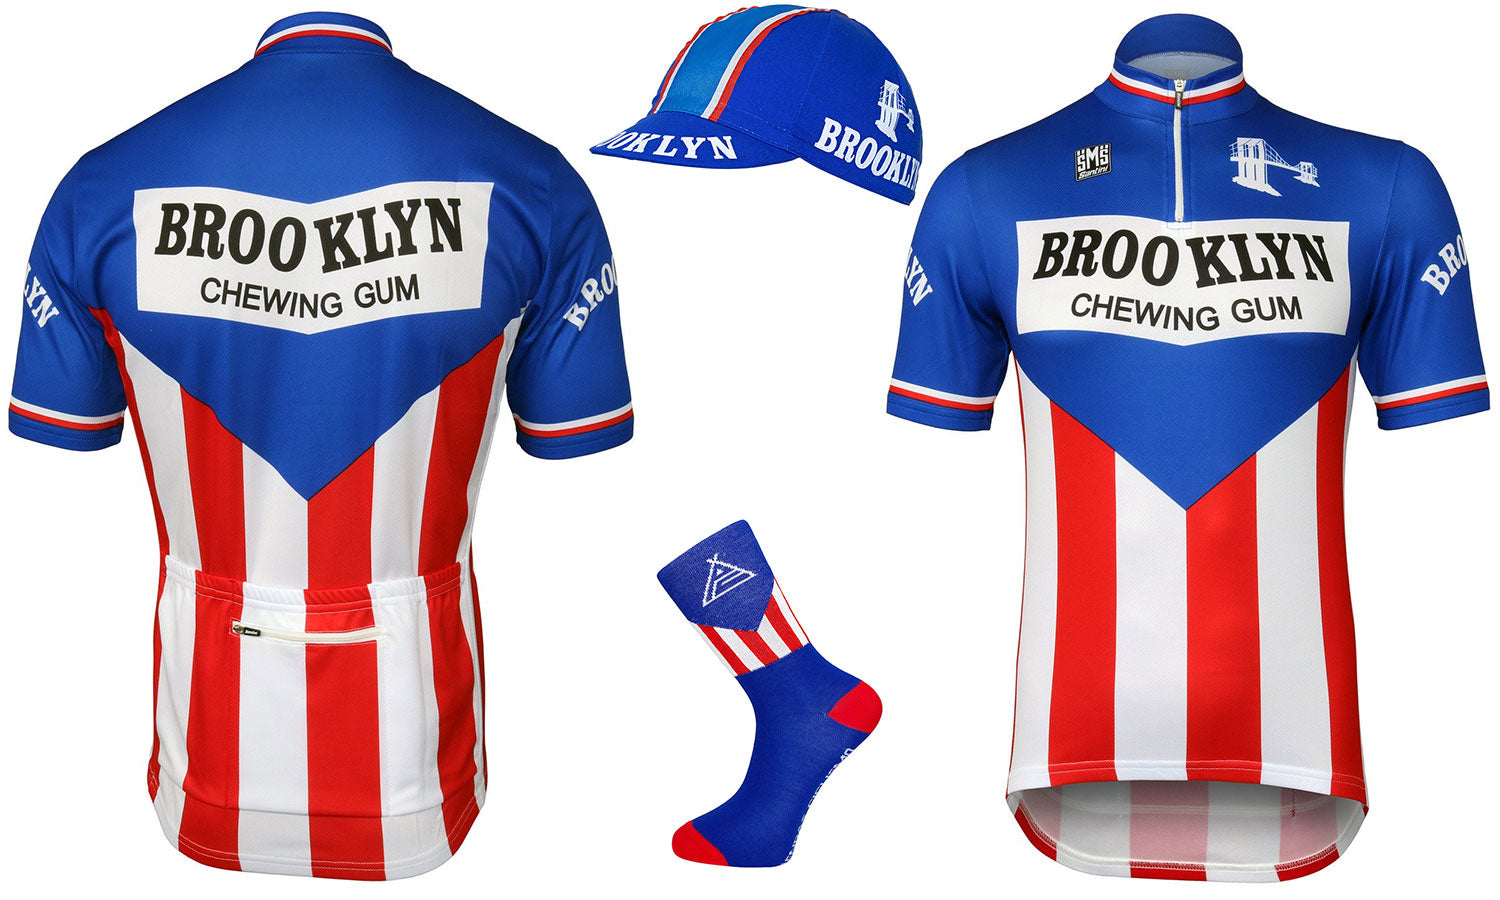 You can buy the Brooklyn Chewing Gum retro cycling team jersey, cycling cap and matching phone case at Prendas Ciclismo.